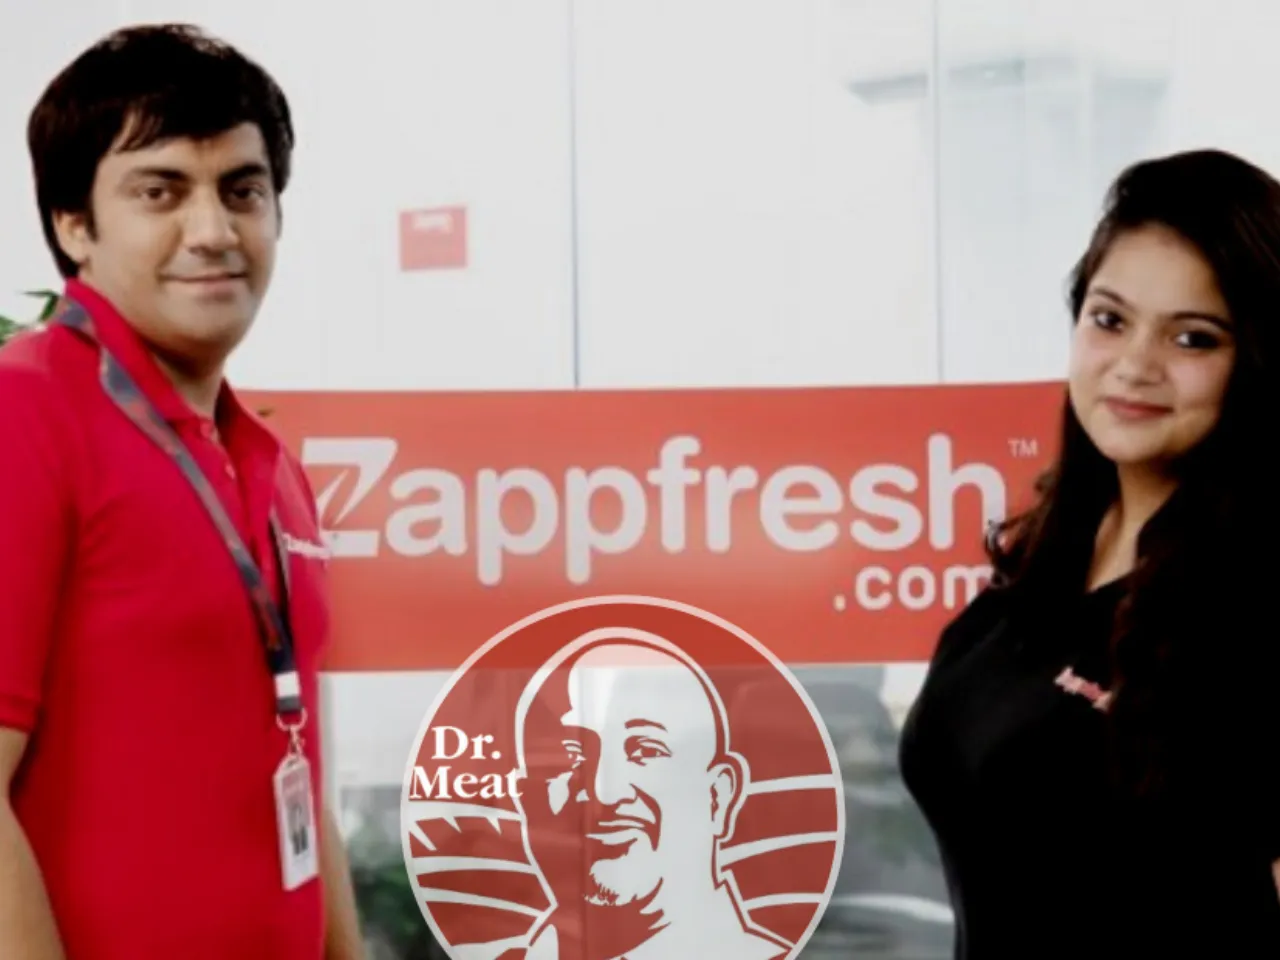 D2C meat delivery brand ZappFresh acquires Dr. Meat for an undisclosed sum